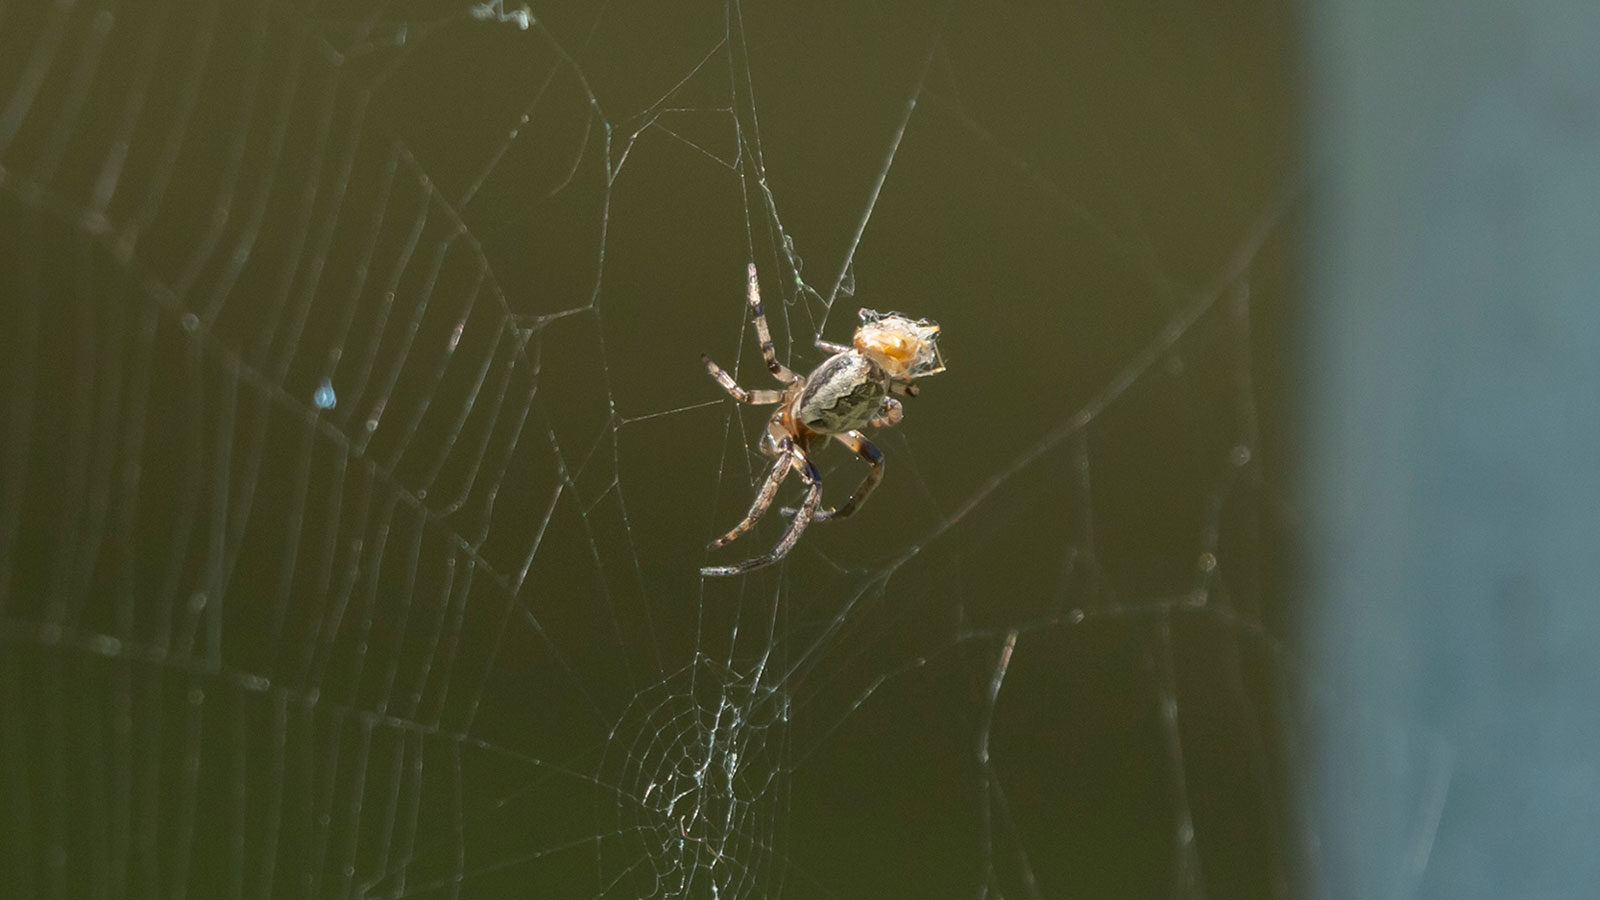 Furrow orb weaver spider wrapping its prey in a web